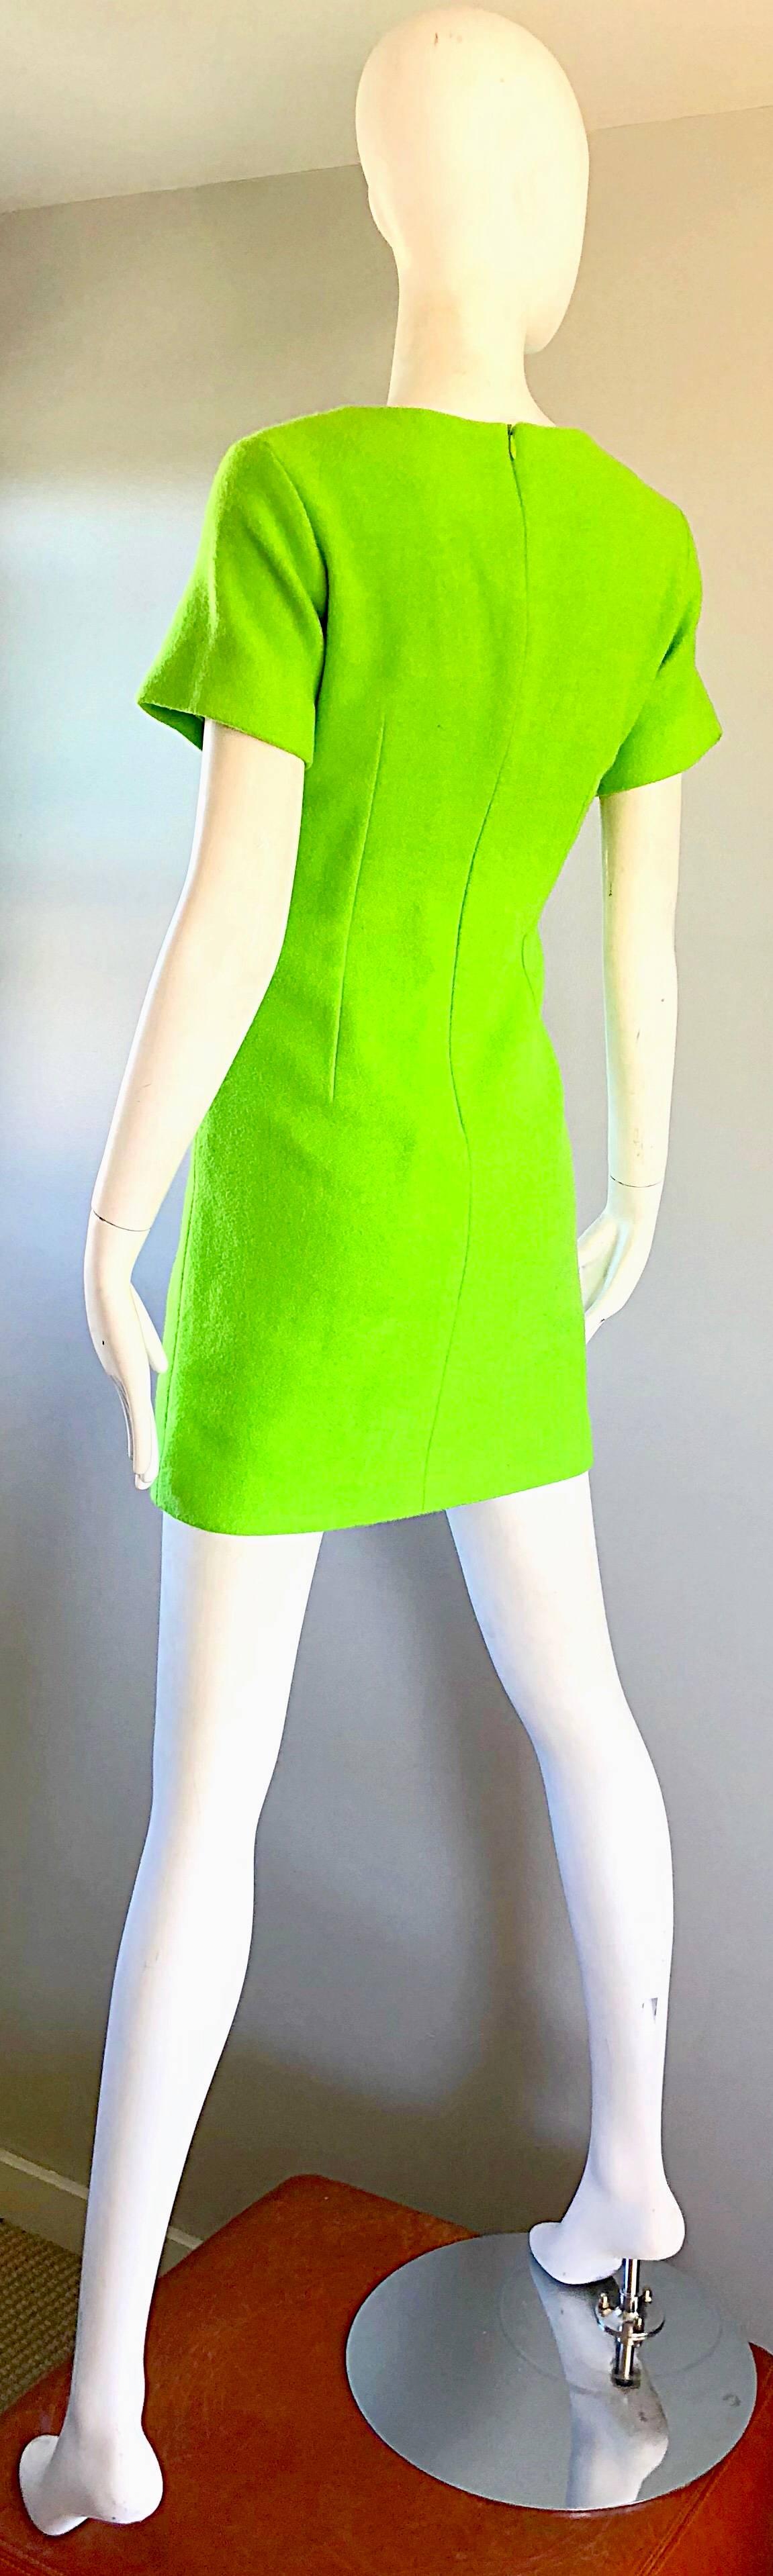 1990s Gianni Versace Neon Lime Green Bodycon Wool Vintage 90s Mini Dress For Sale 3